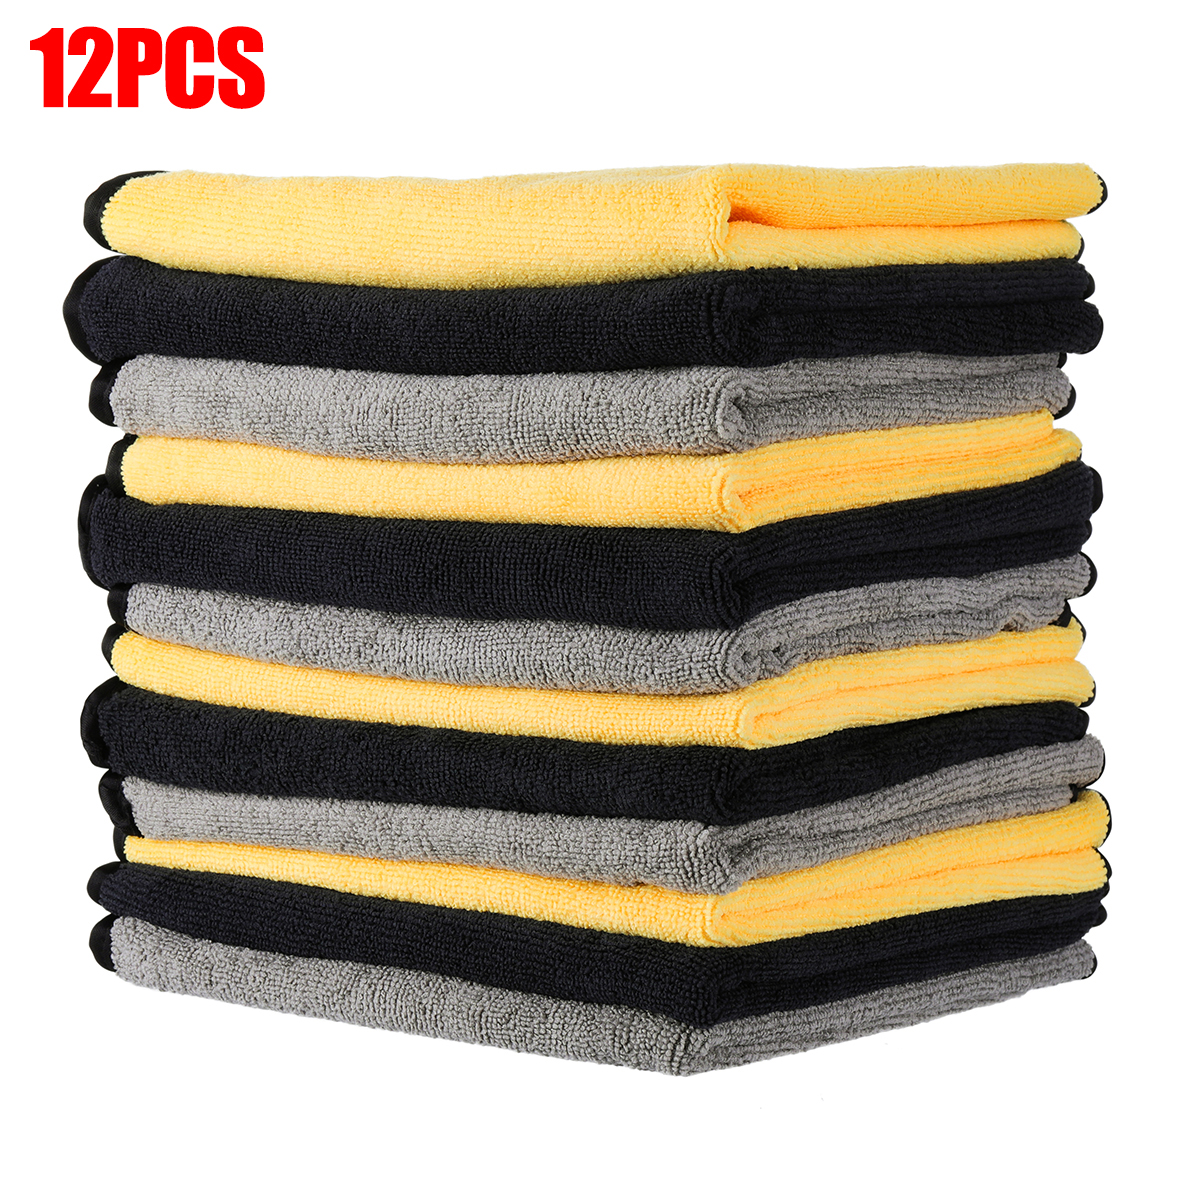 MATCC 12 Pack Microfiber Cleaning Cloths for Cars Detailing